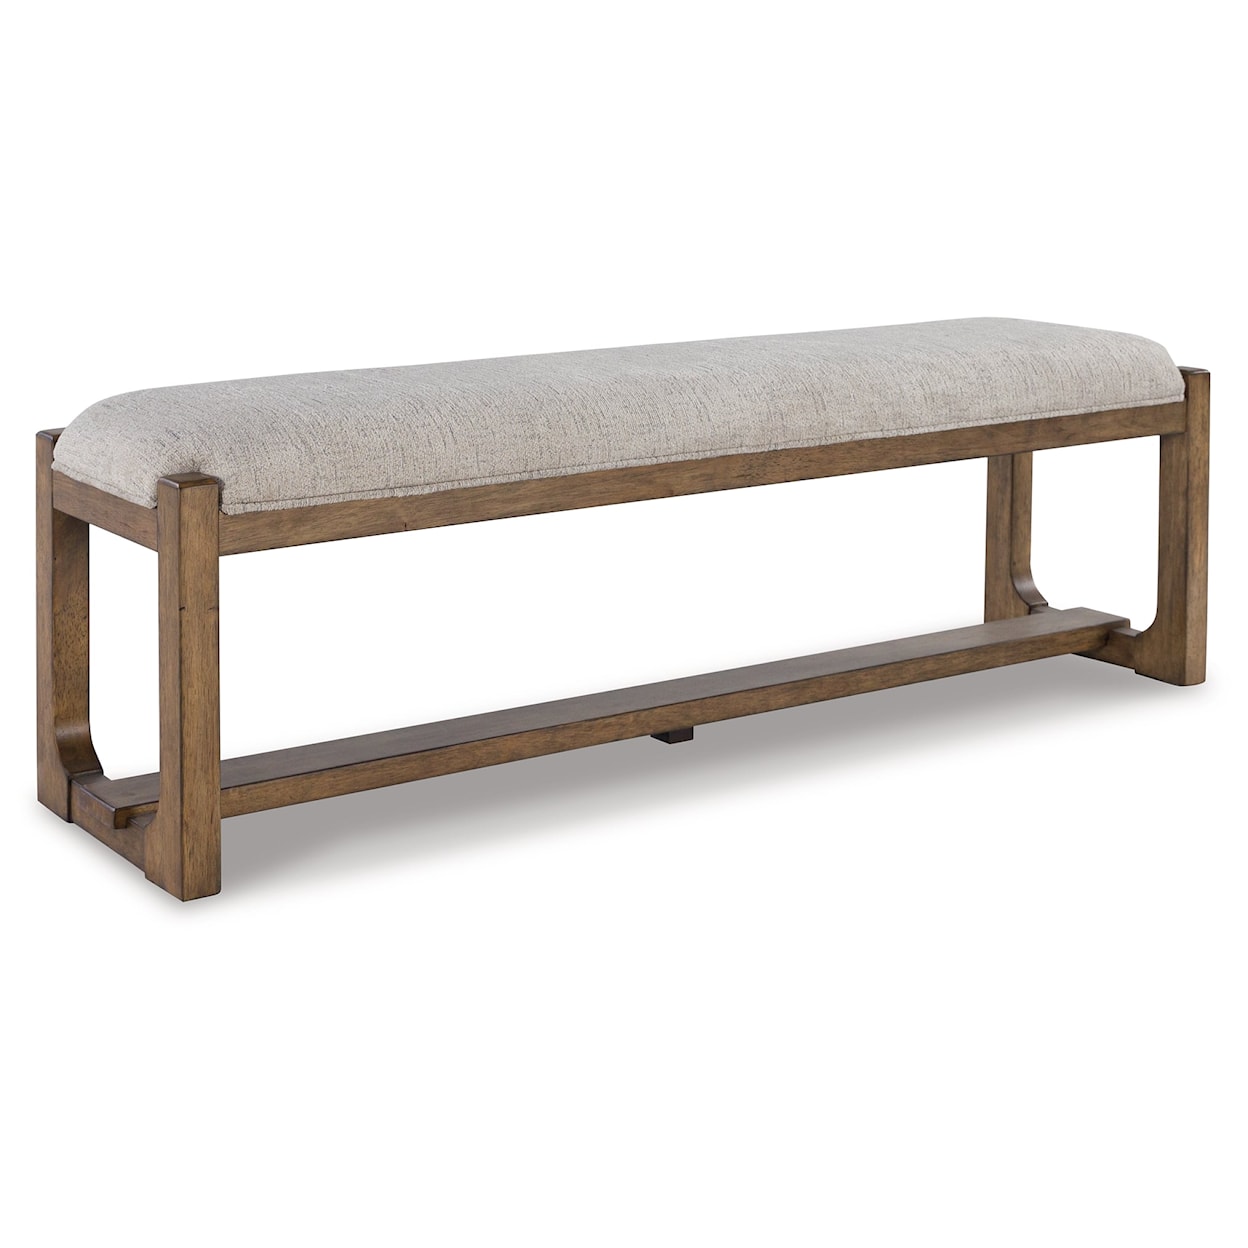 Signature Design by Ashley Cabalynn Upholstered Dining Bench